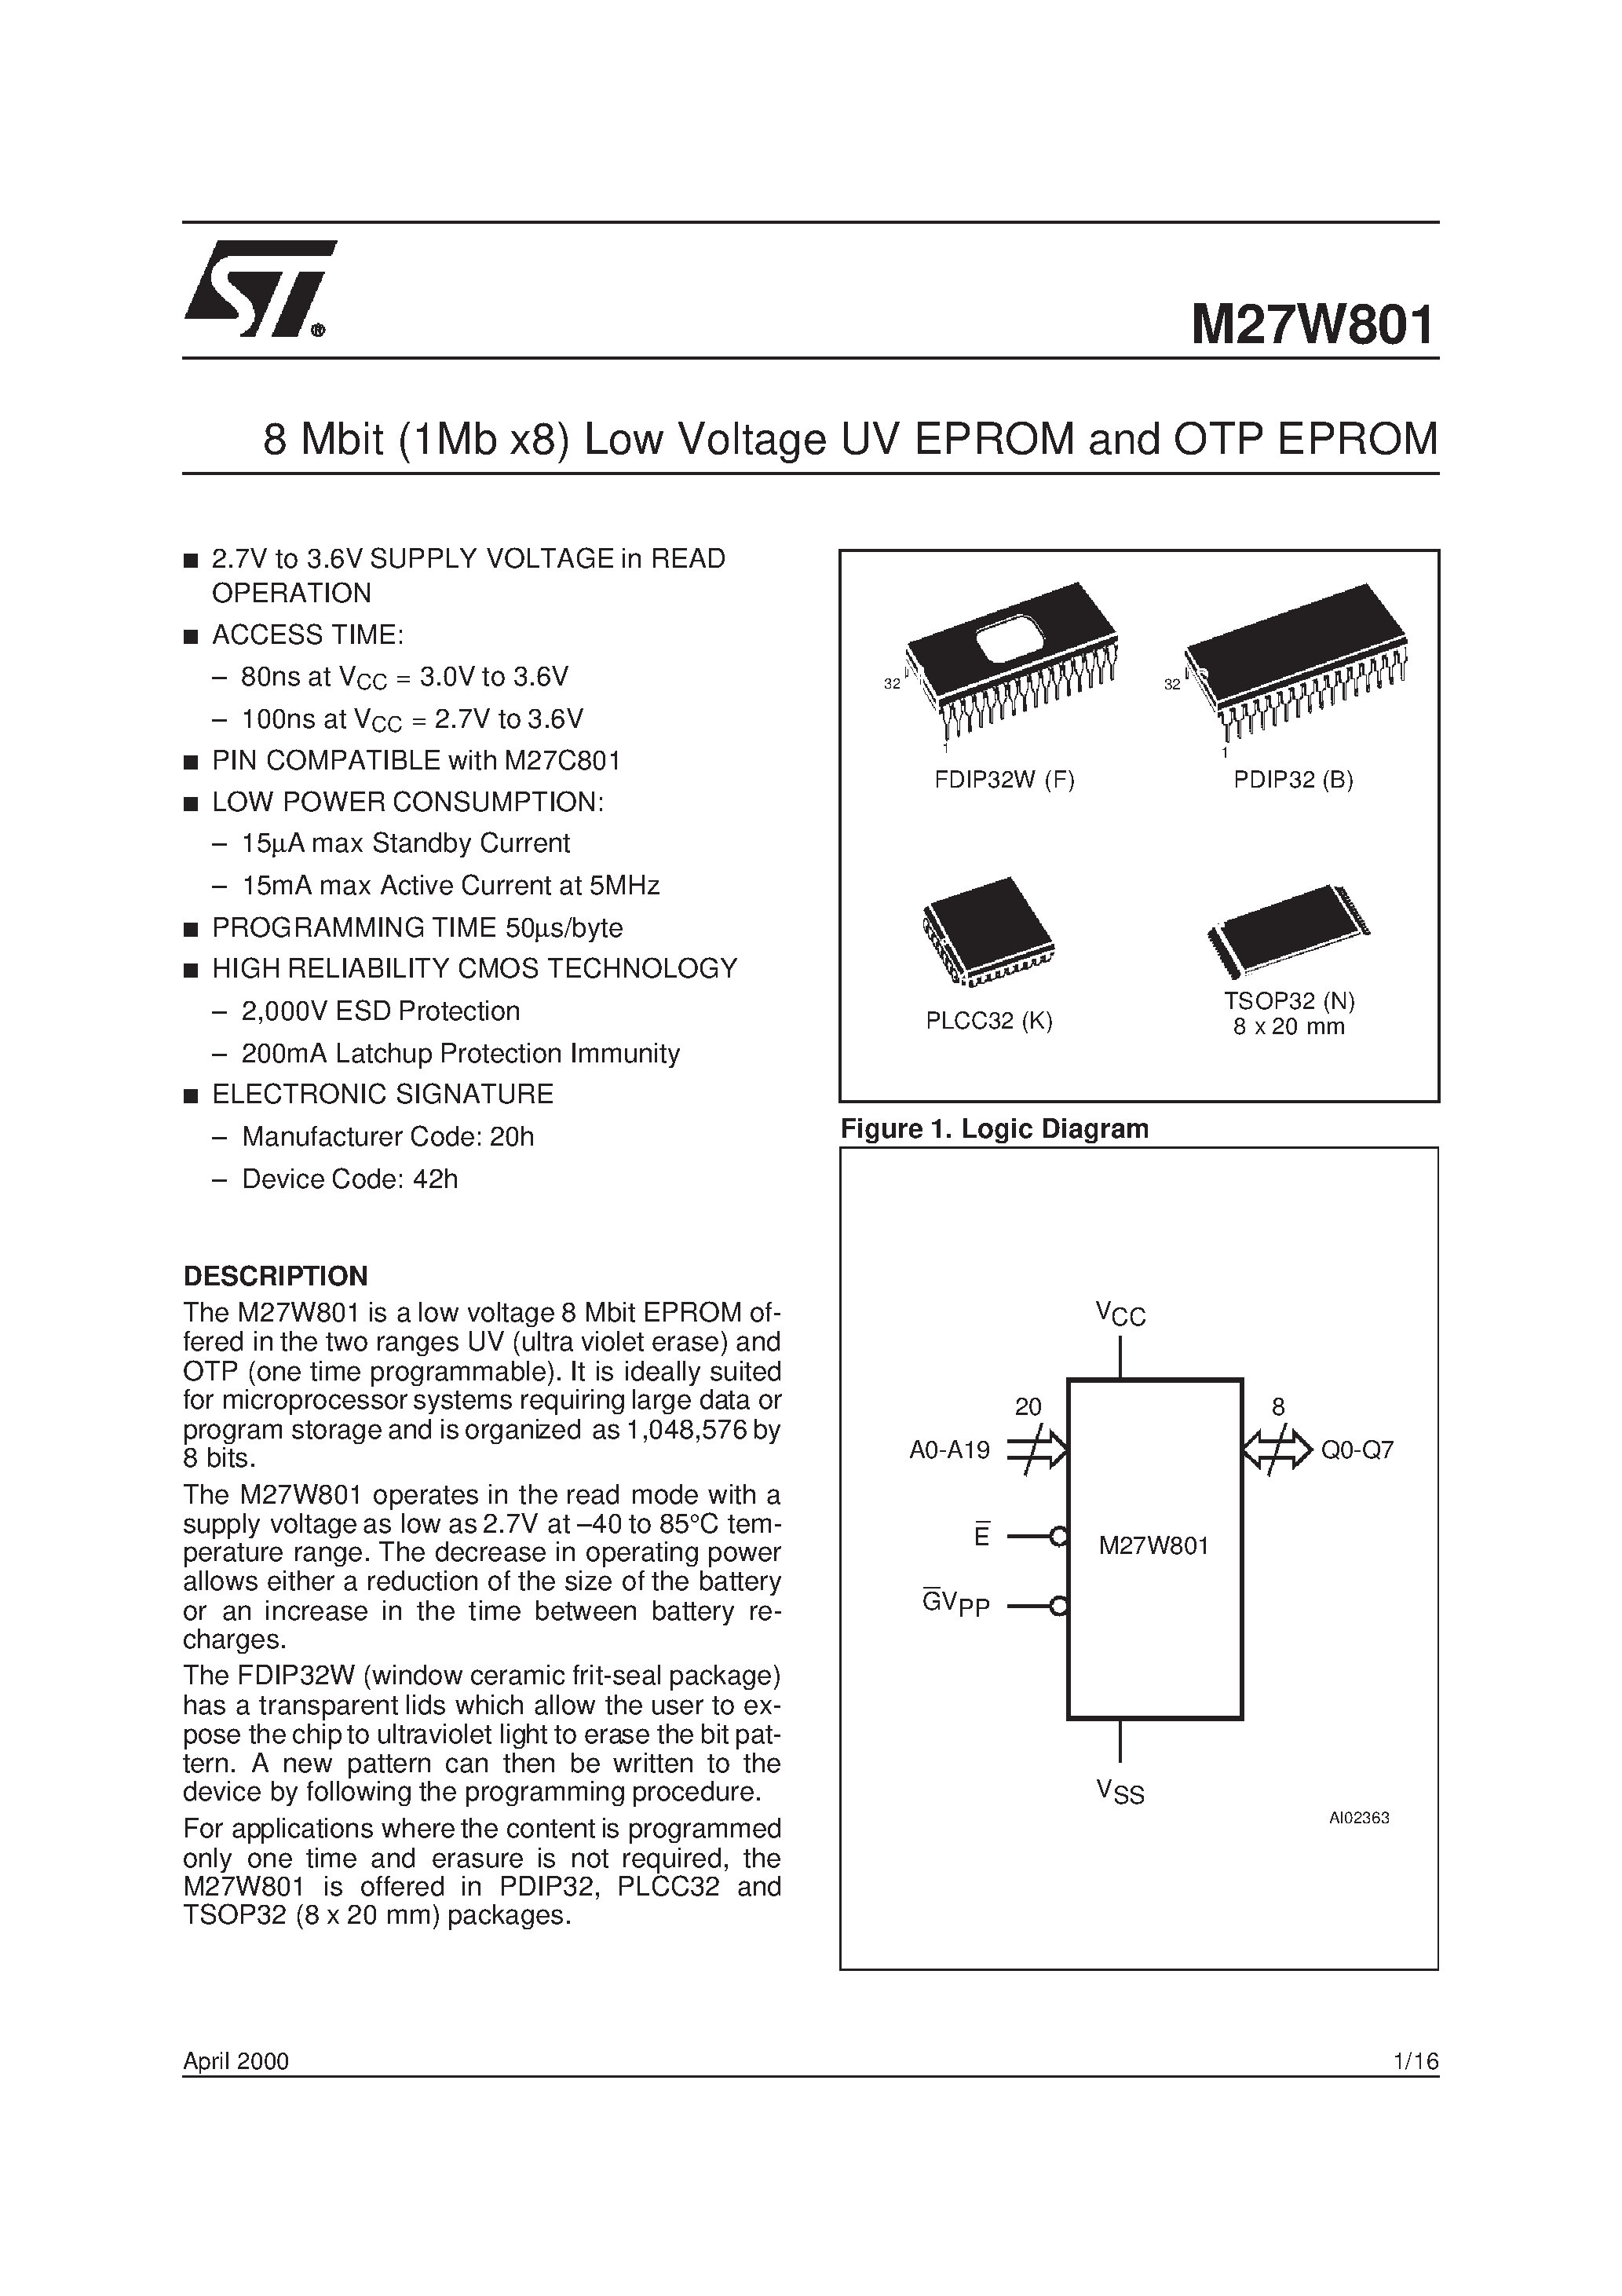 Datasheet M27W801-120F6TR - 8 Mbit 1Mb x8 Low Voltage UV EPROM and OTP EPROM page 1